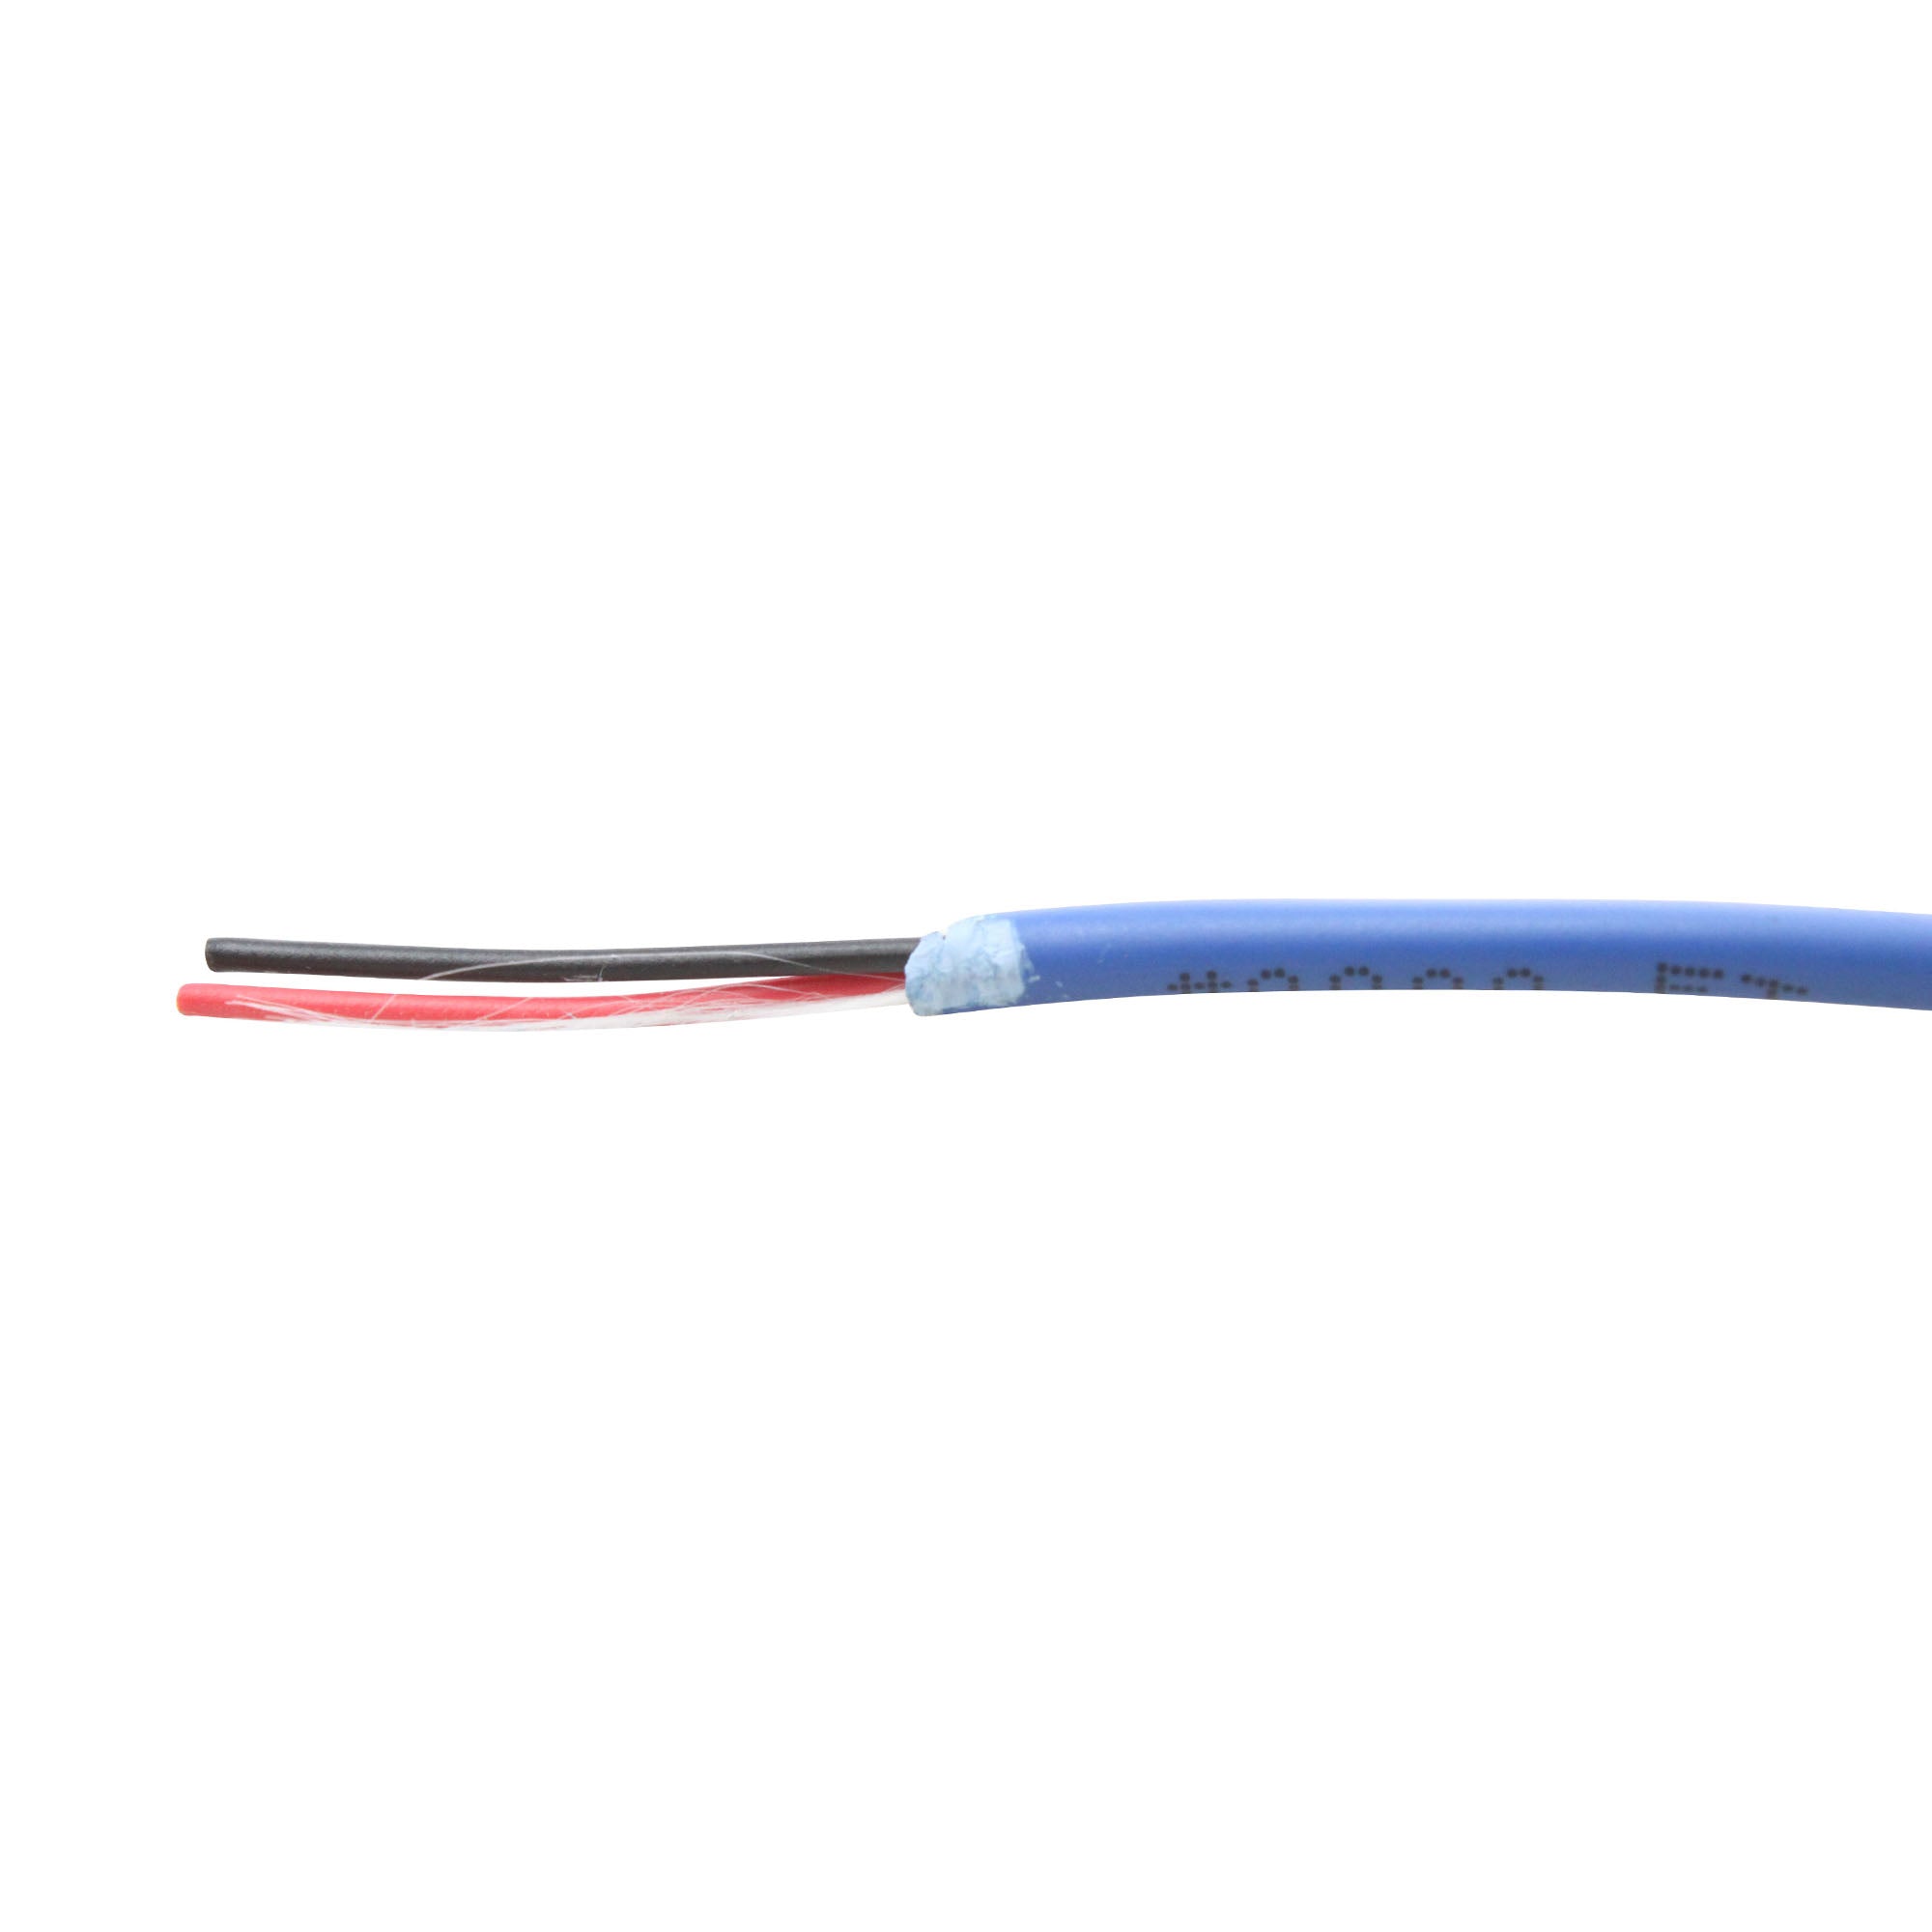 FASTER CABLE, FASTER CABLE P222C-DRKBLU 22AWG 2C, 22/2 STR PLENUM CONTROL CABLE, DK BLUE 1000'